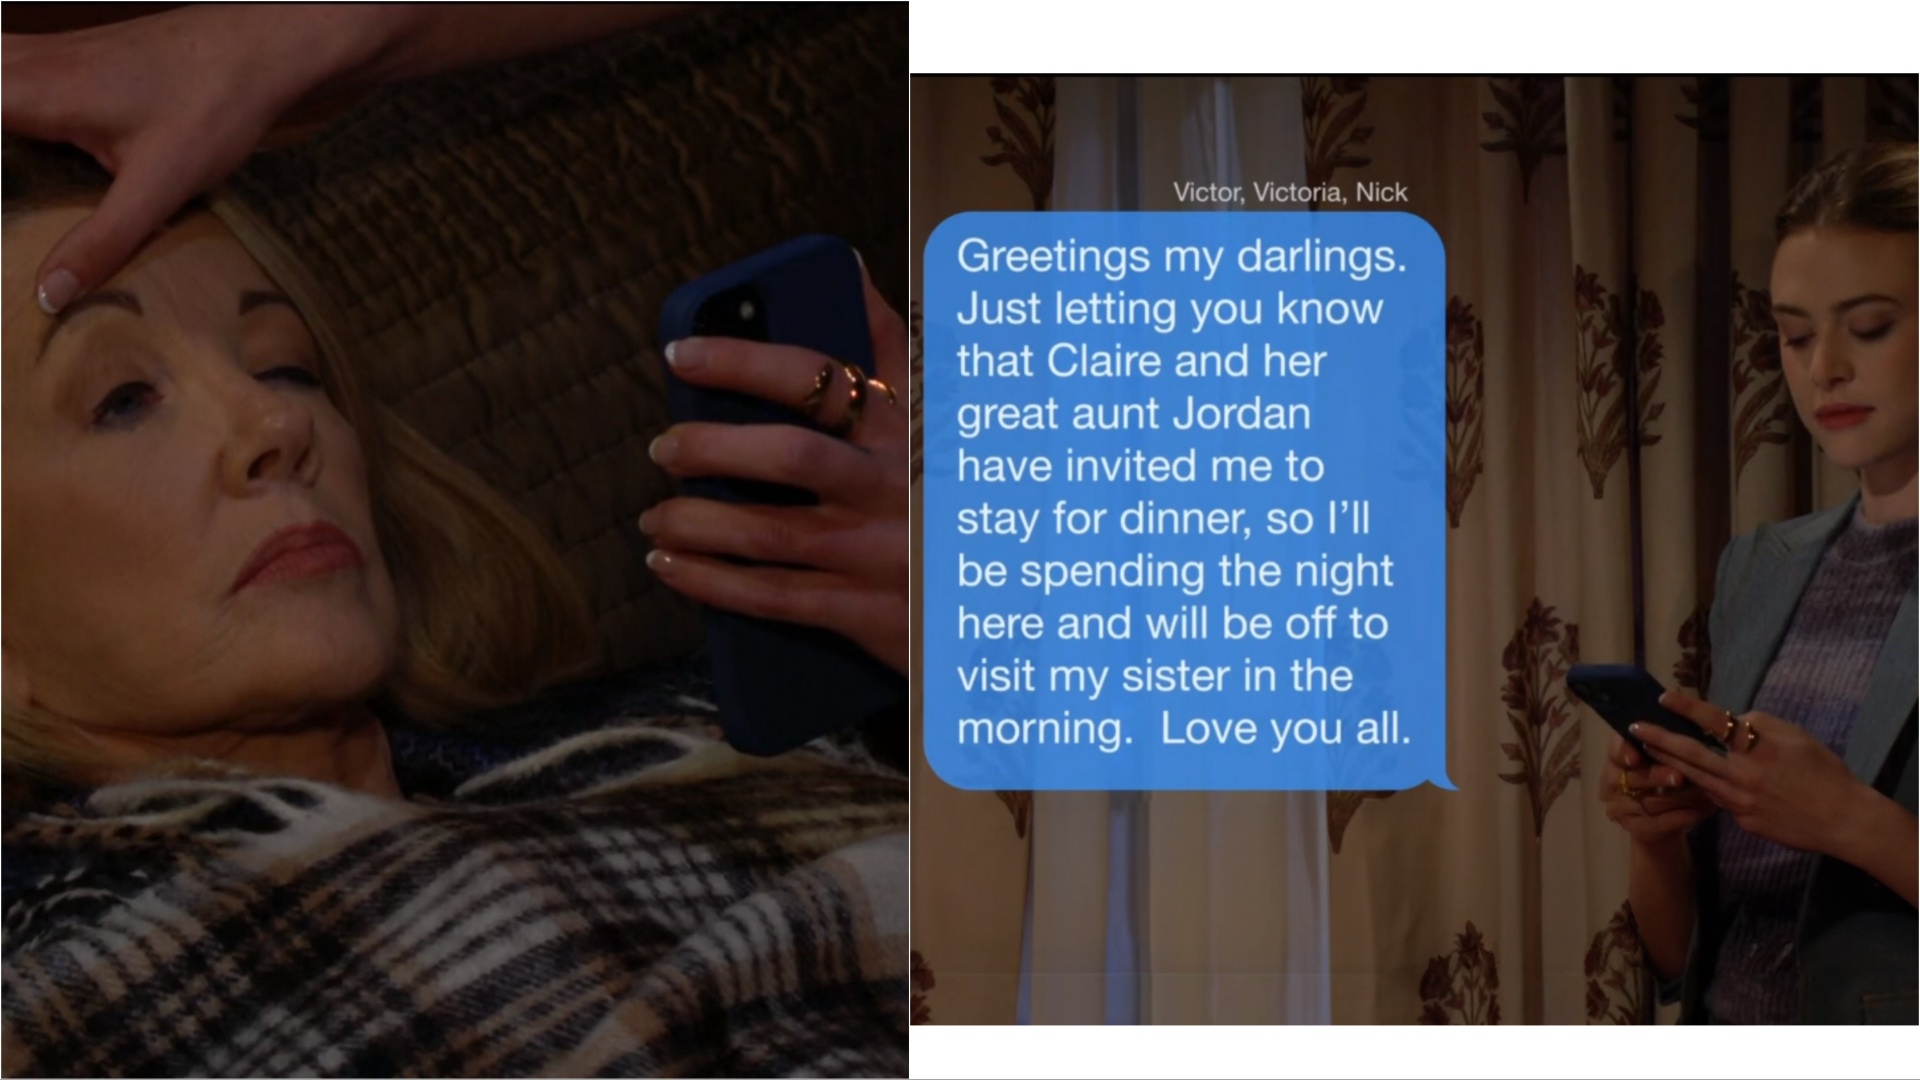 Claire unlocks Nikki's phone and sends a text.